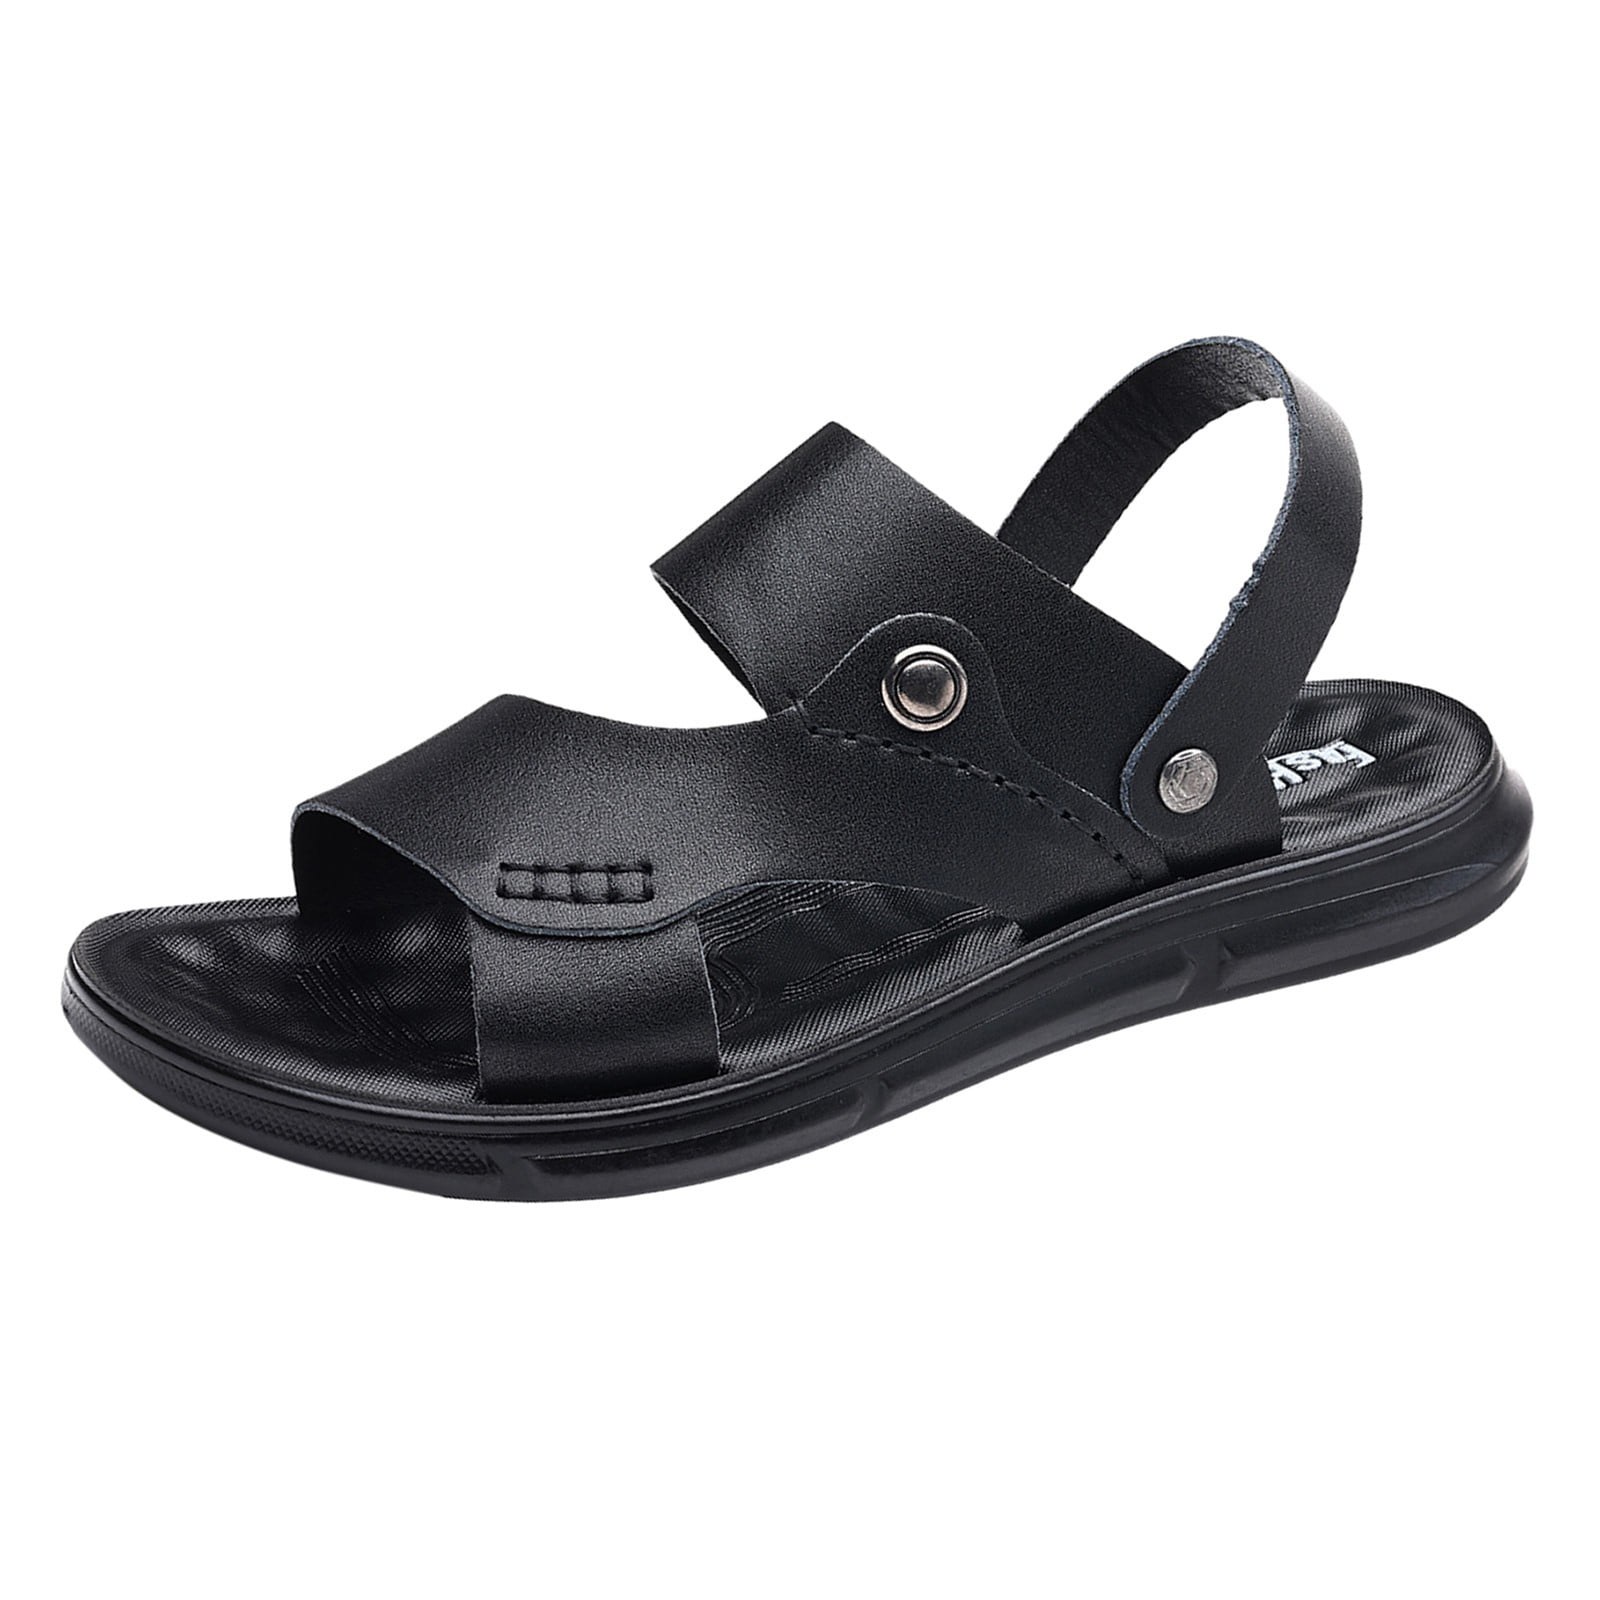 The Best Sandals for Men Will Ignite All Your Summer Looks - GQ Middle East-sgquangbinhtourist.com.vn